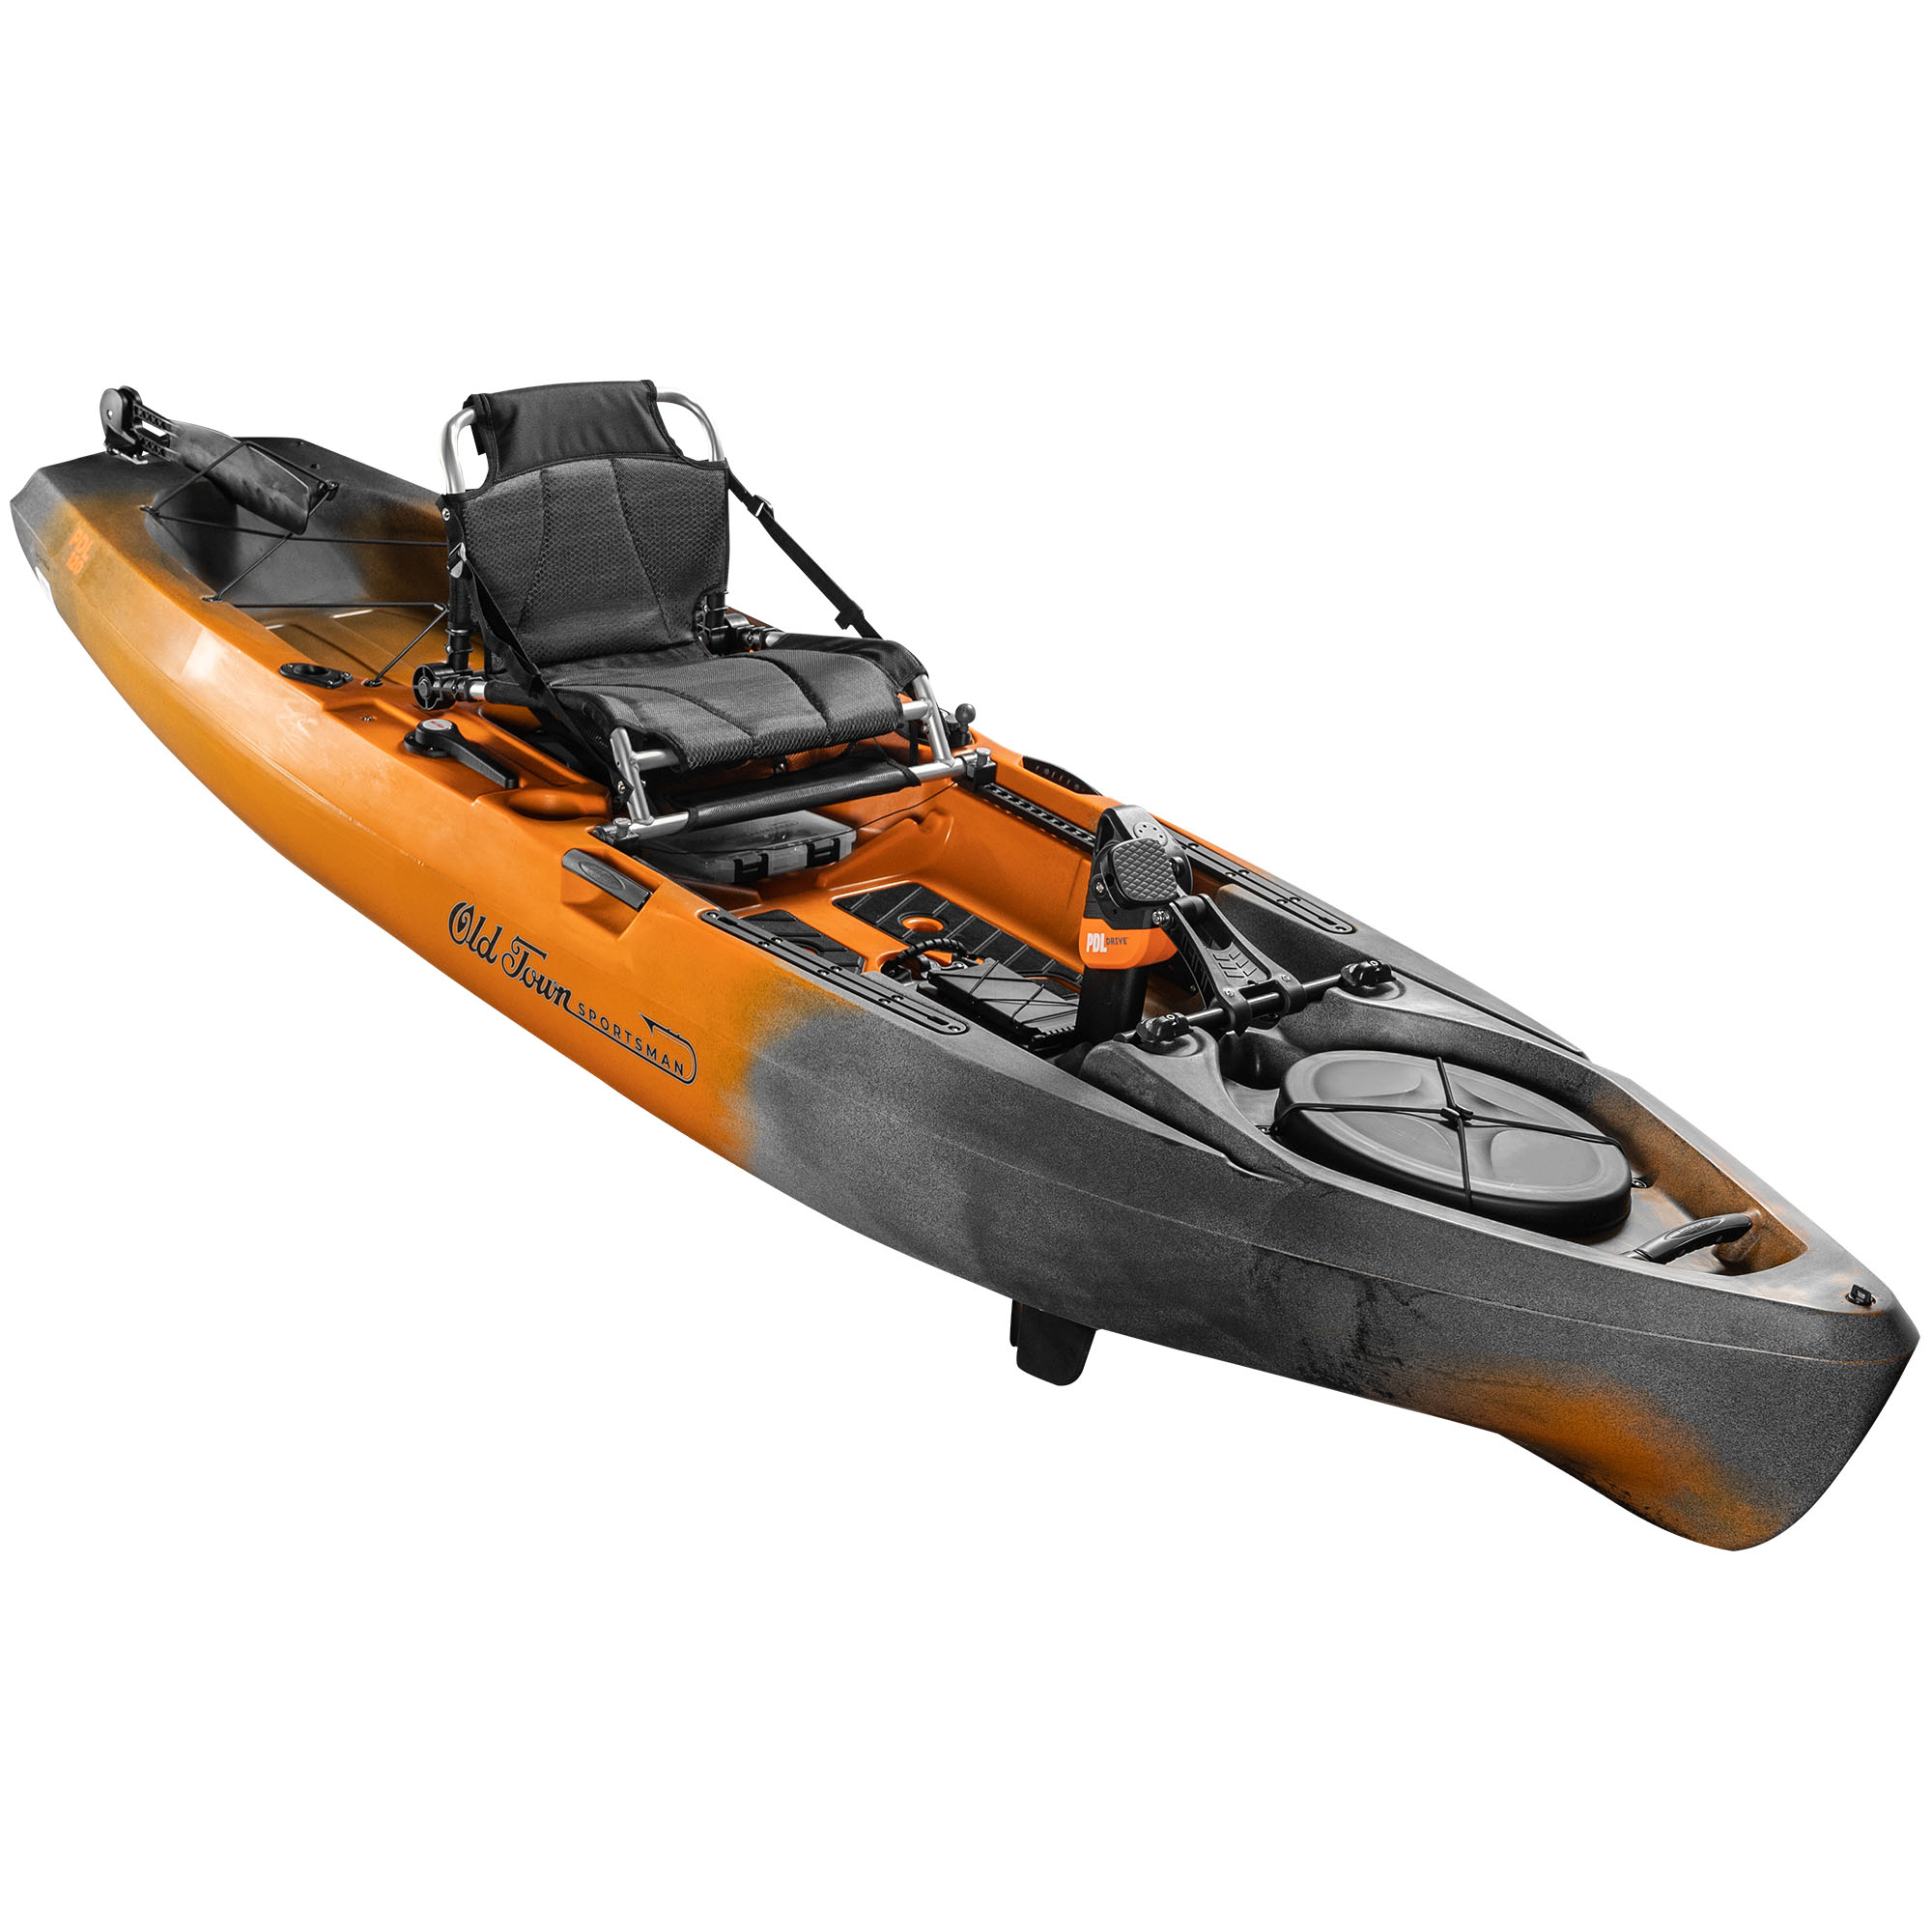 An image of the type of kayak that's gone missing. (Courtesy of New York State Police)